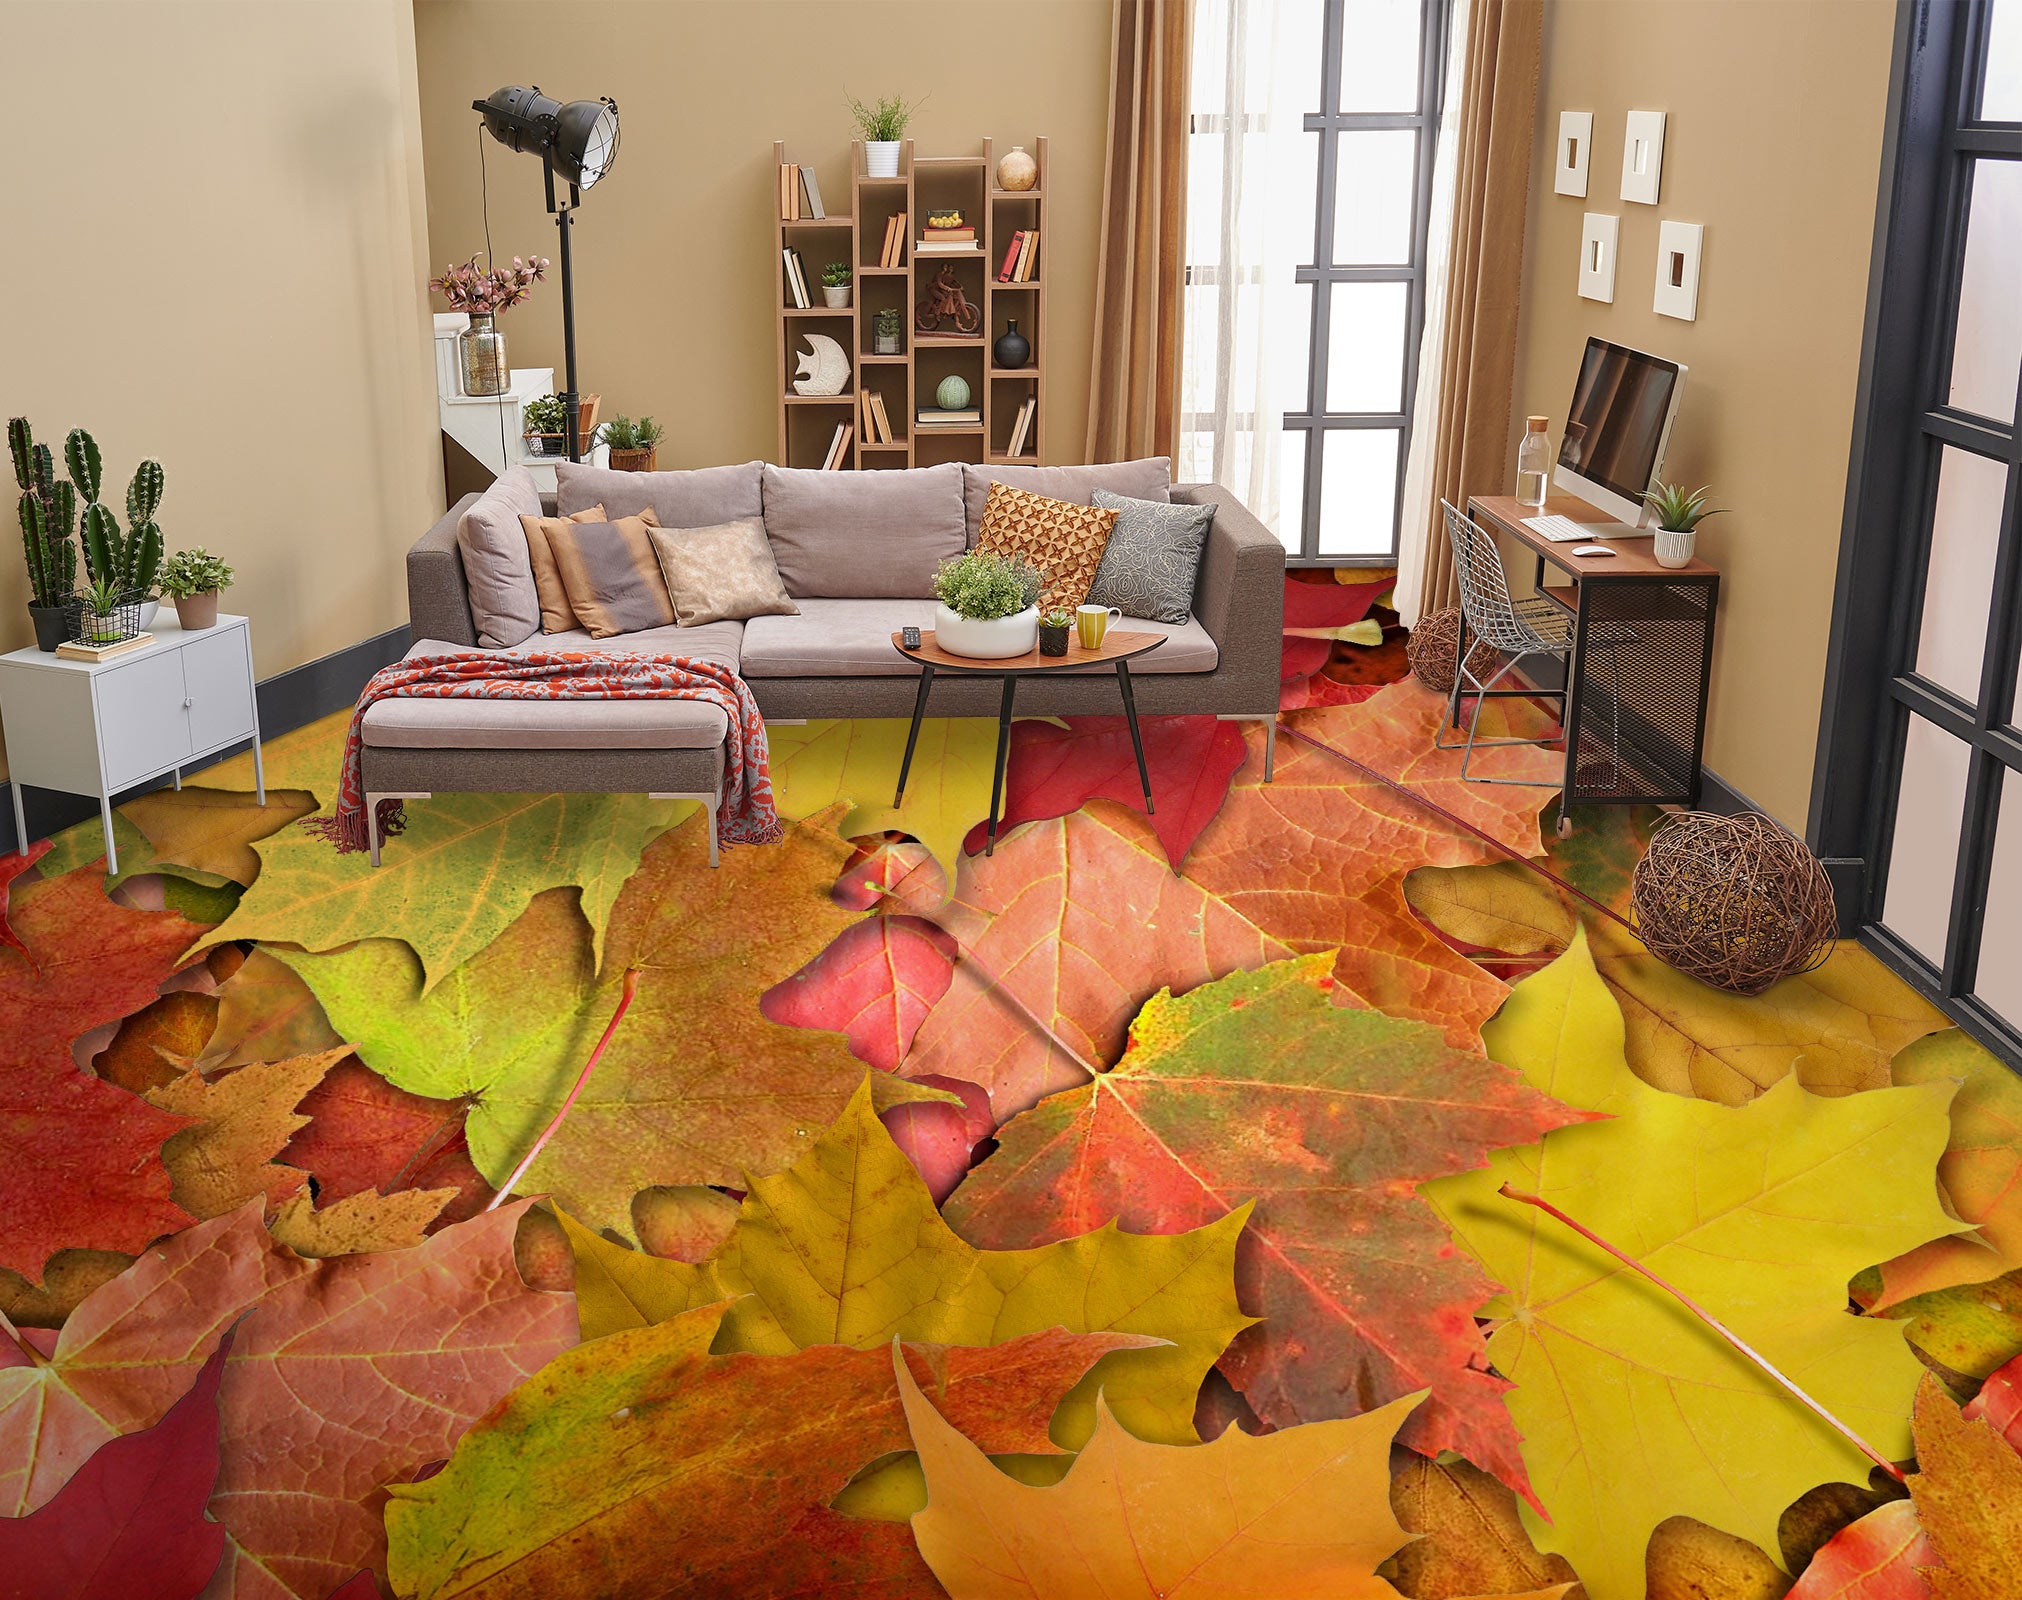 3D Autumn Cascading Leaves 1365 Floor Mural  Wallpaper Murals Self-Adhesive Removable Print Epoxy